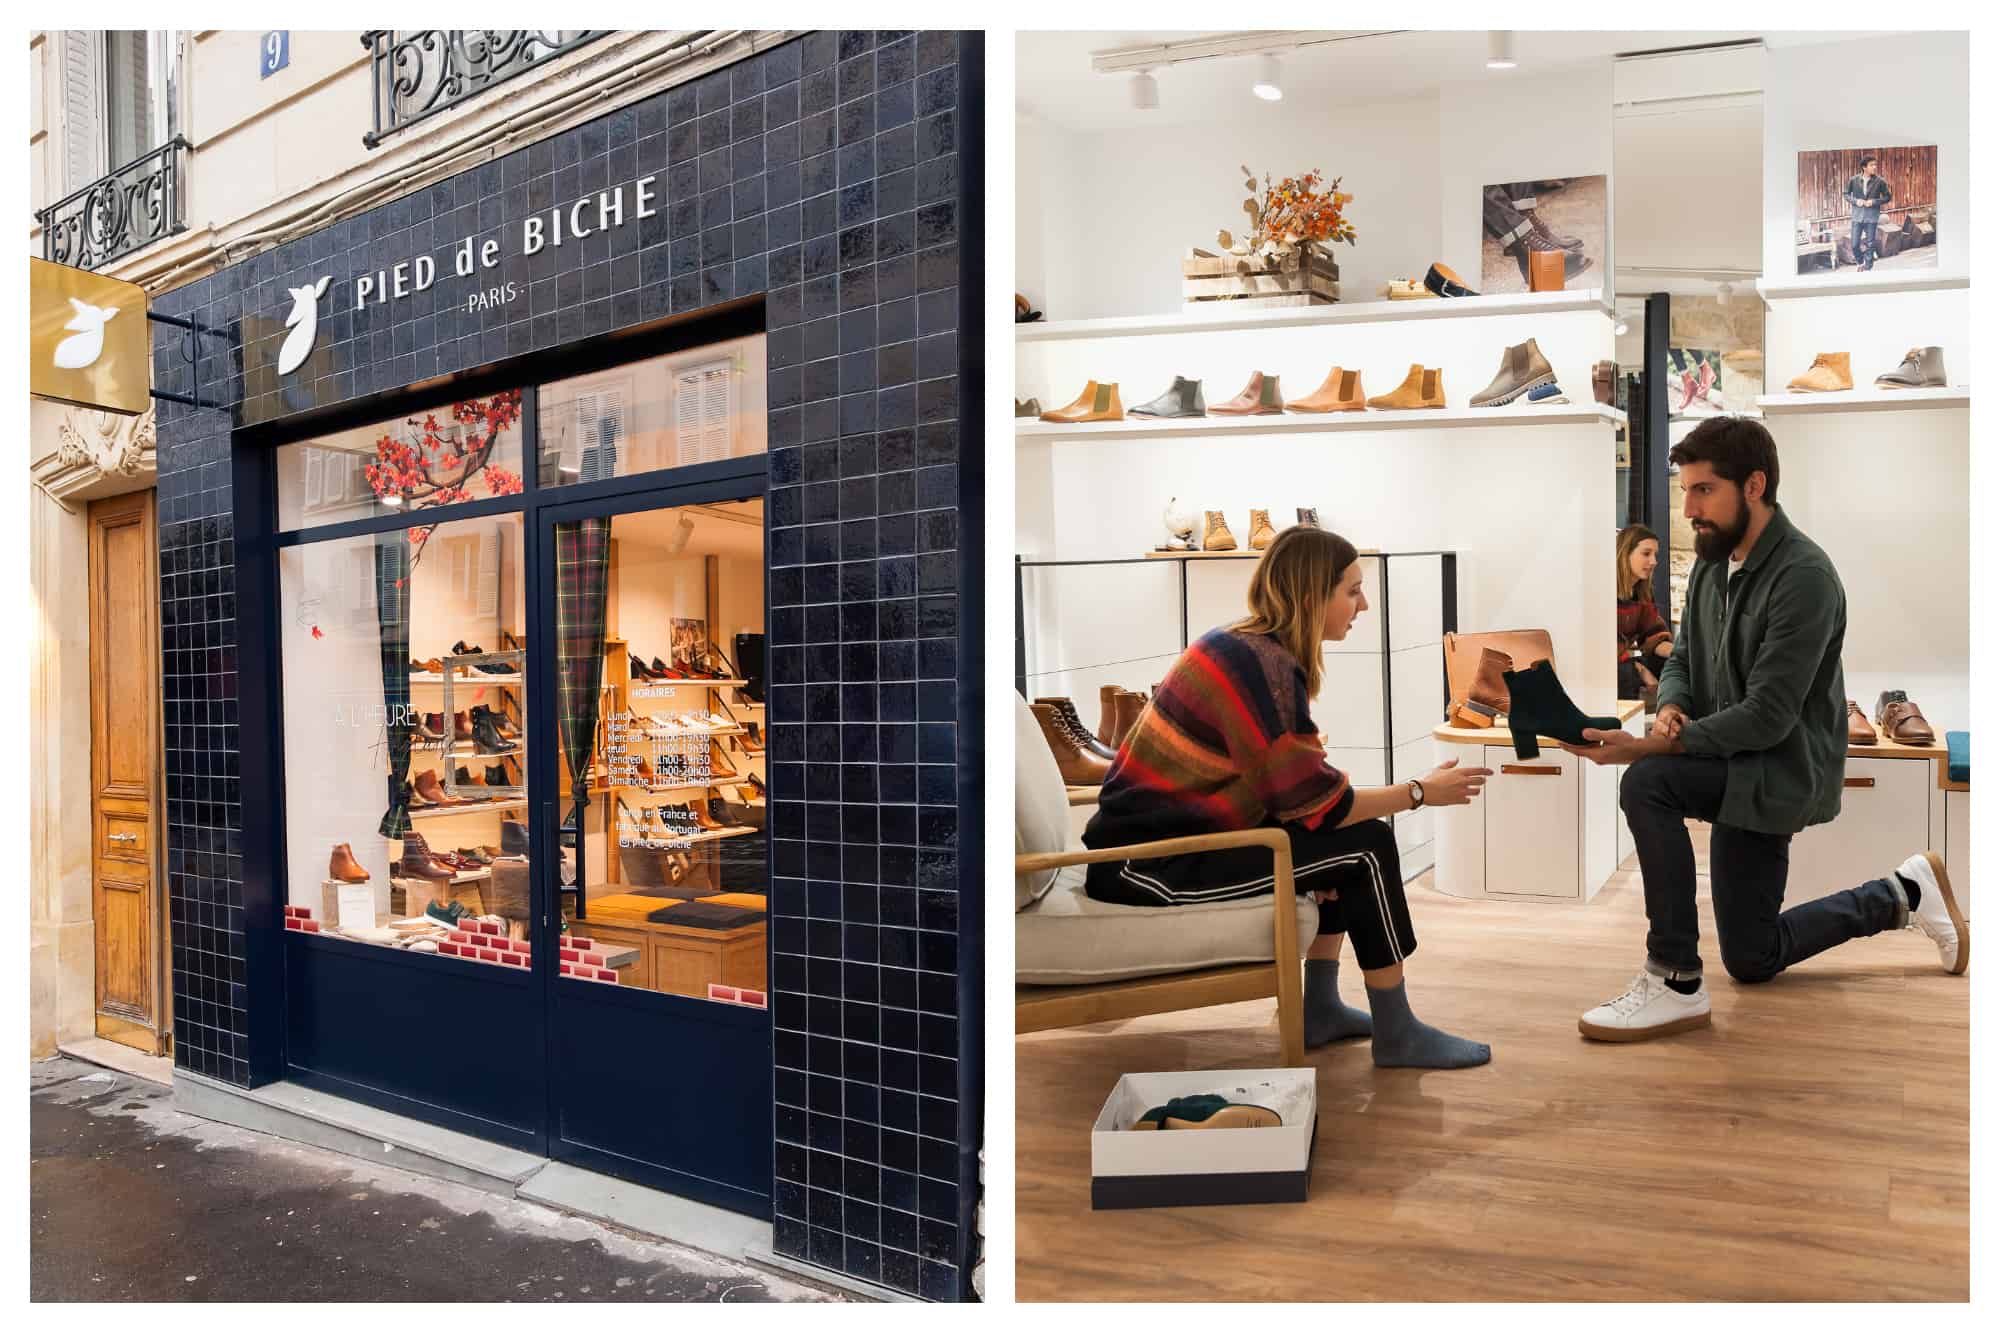 Holiday Giveaway: Win A Pair of French  Designer Shoes From Pied de Biche